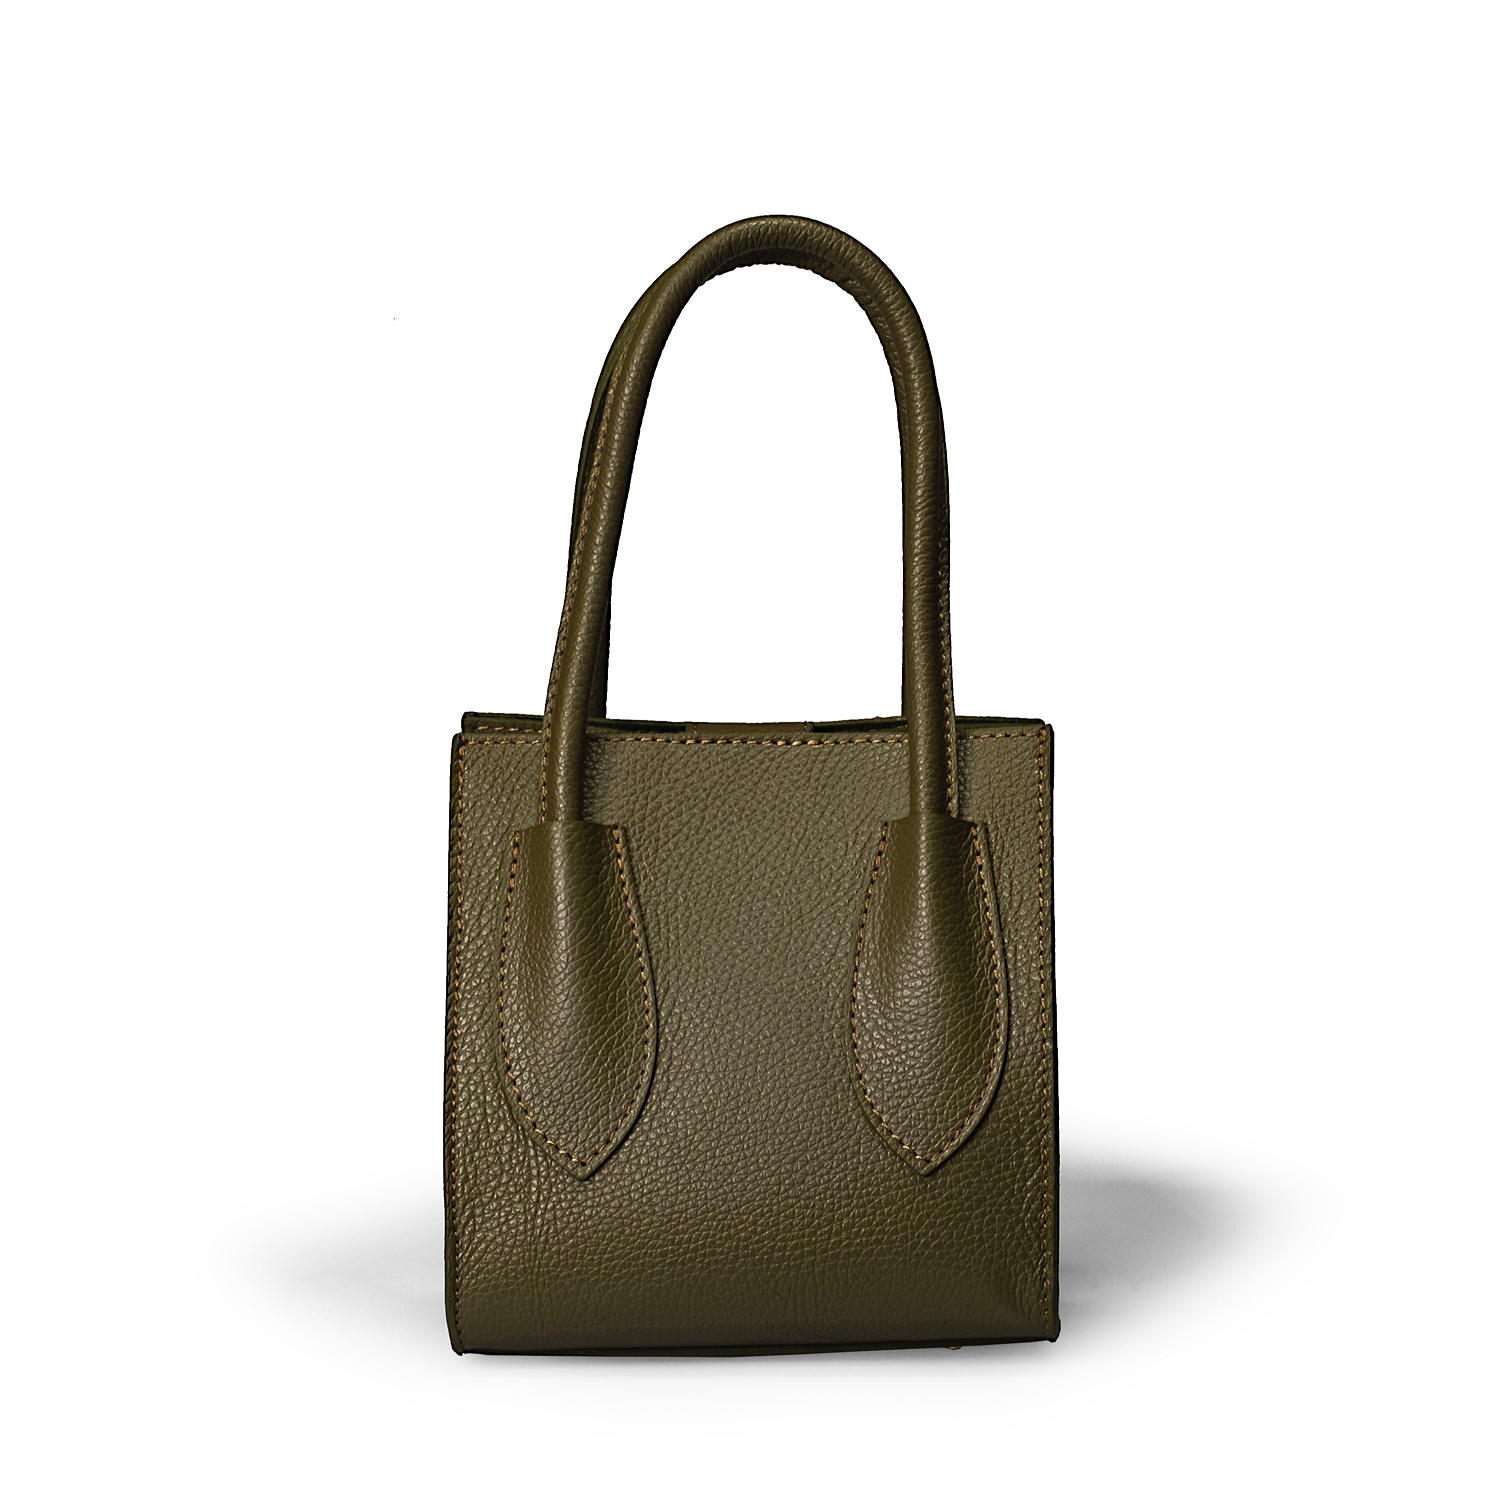 Low cost leather handbags Made in Italy by Bellini. Wholesale, OEM, private label handbags.